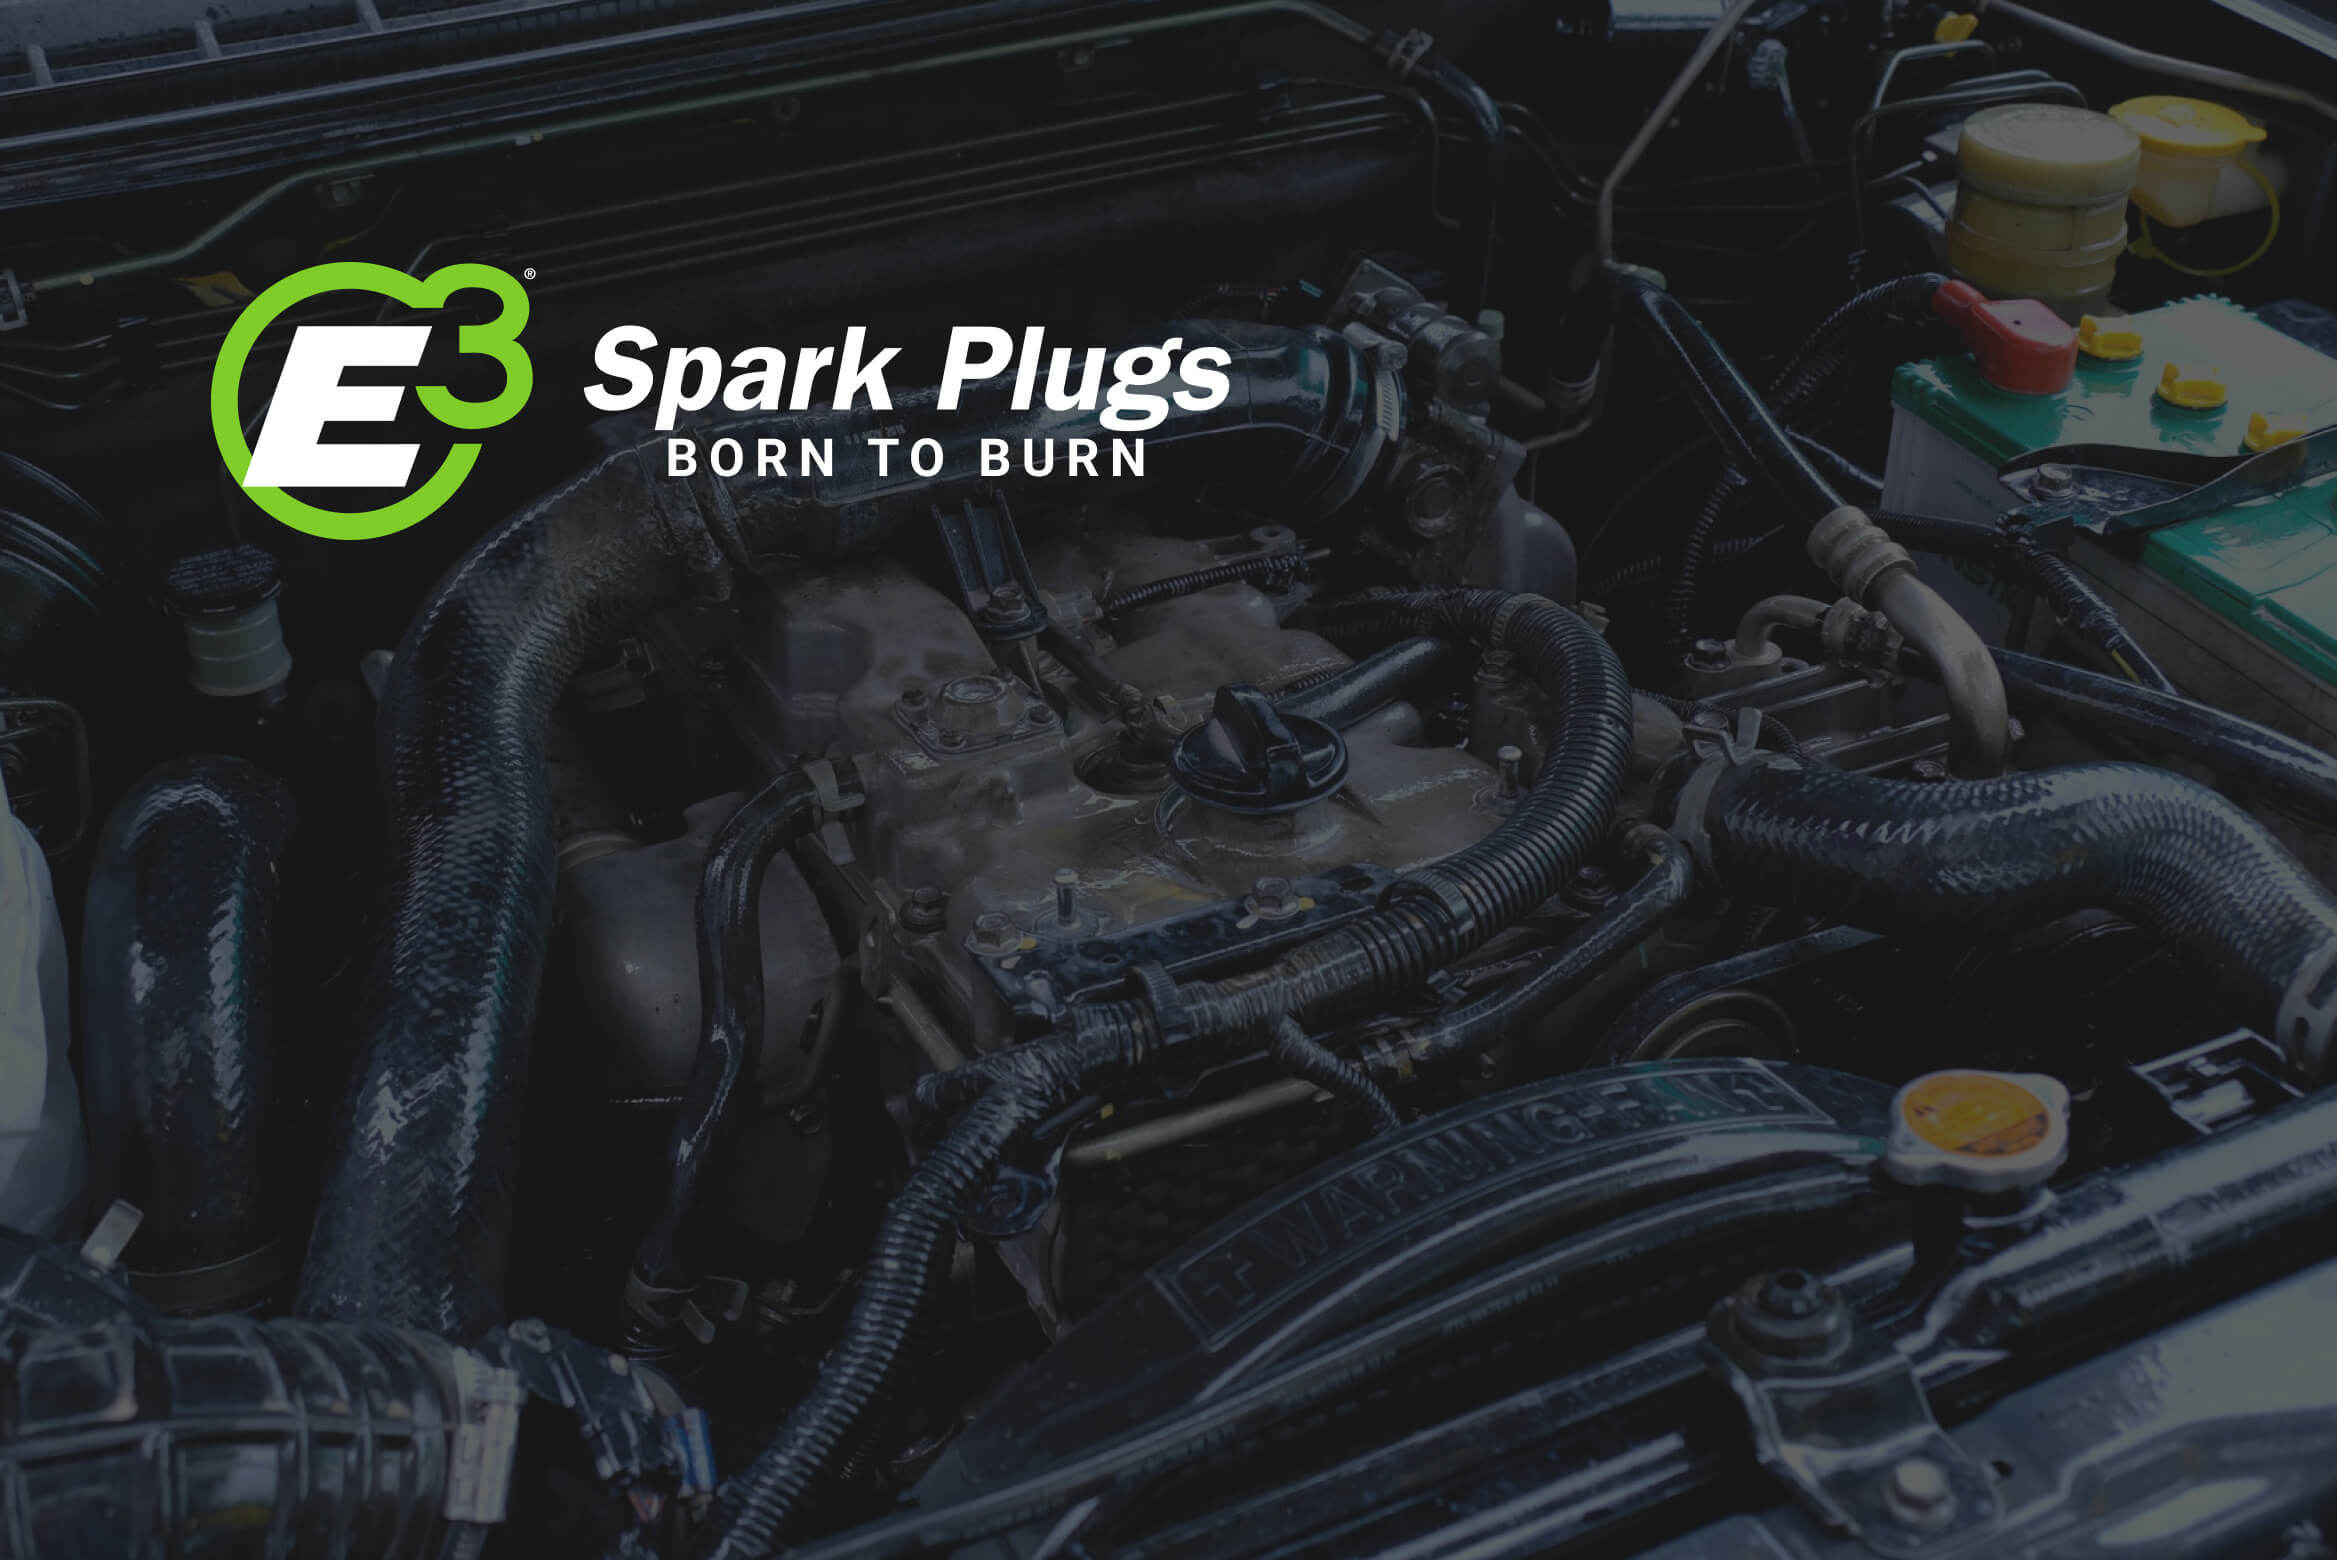 Happy Holidays from E3 Spark Plugs